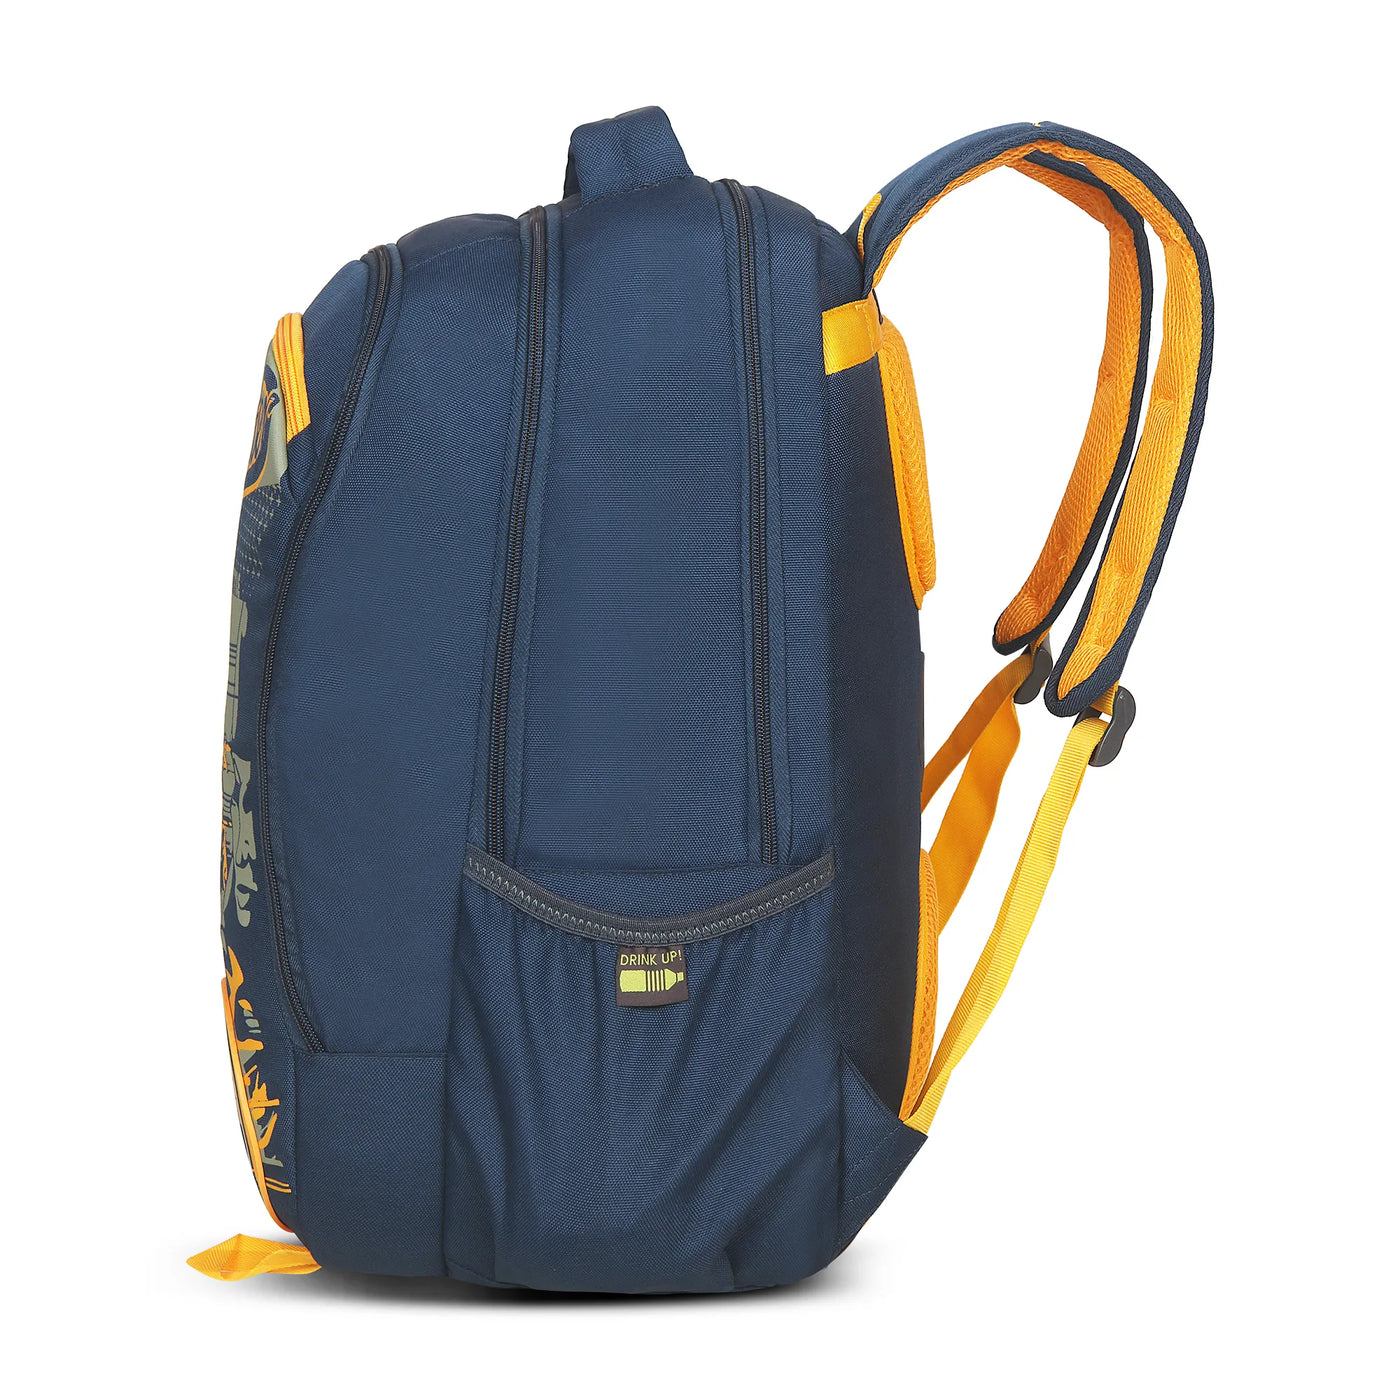 SKYBAGS OFFROADER PRO "LAPTOP BACKPACK" NAVY BLUE